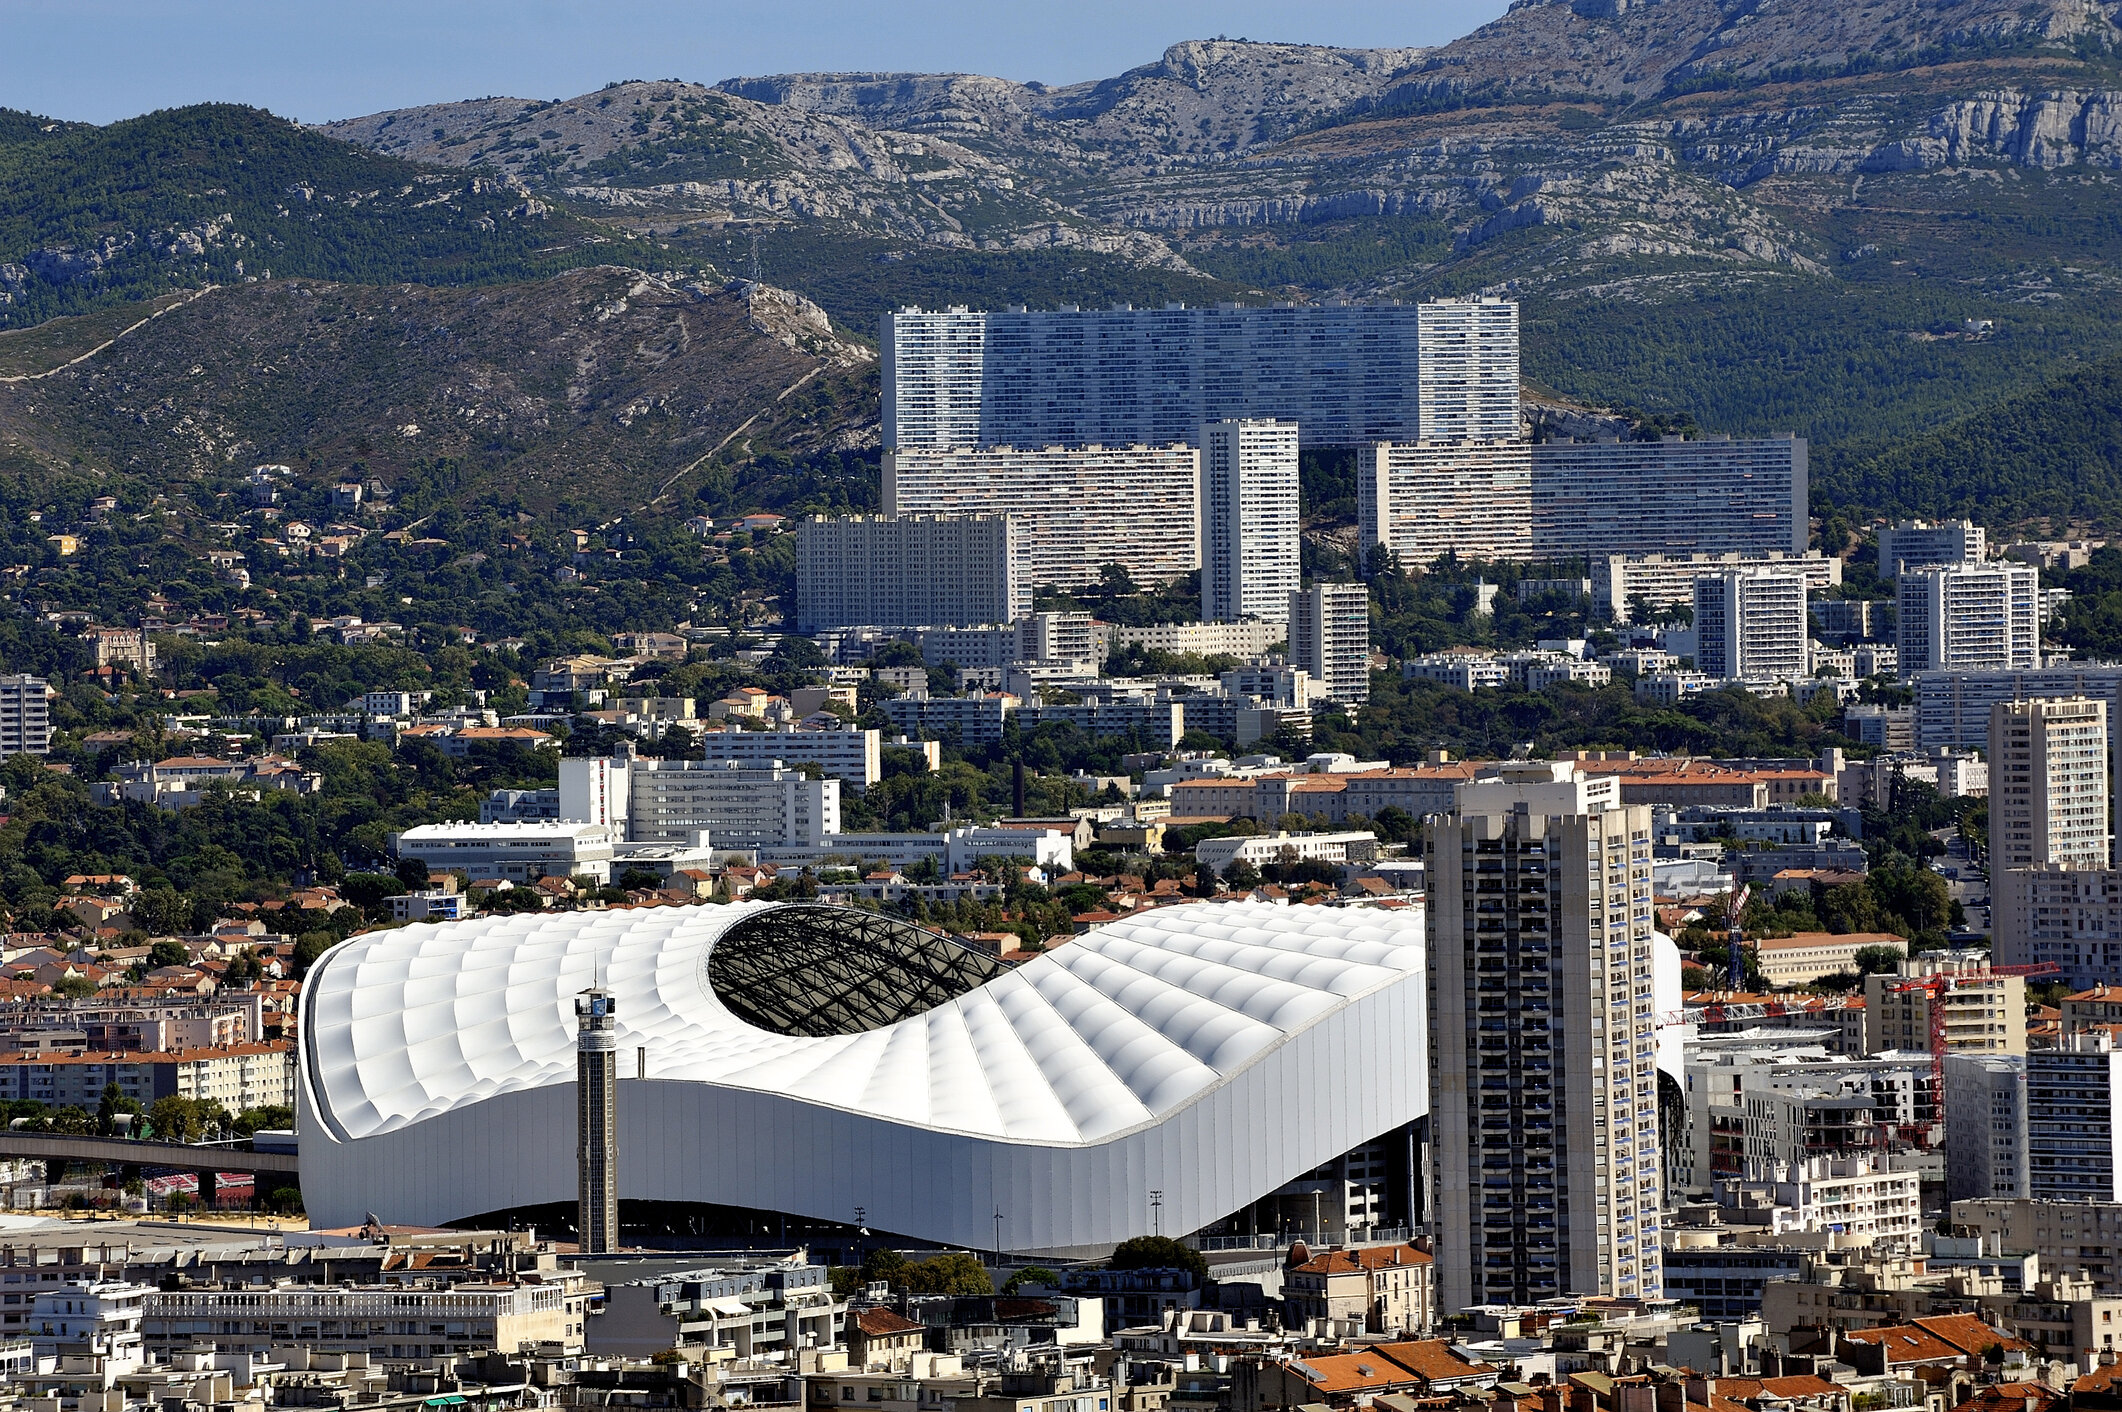 La Rouvière, Marseille's city within the city, in the background, with the Stade Vélodrome landmark — home to the local football team Olympique de Marseille — in the foreground (Photo: Gilles Paire/Getty Images).